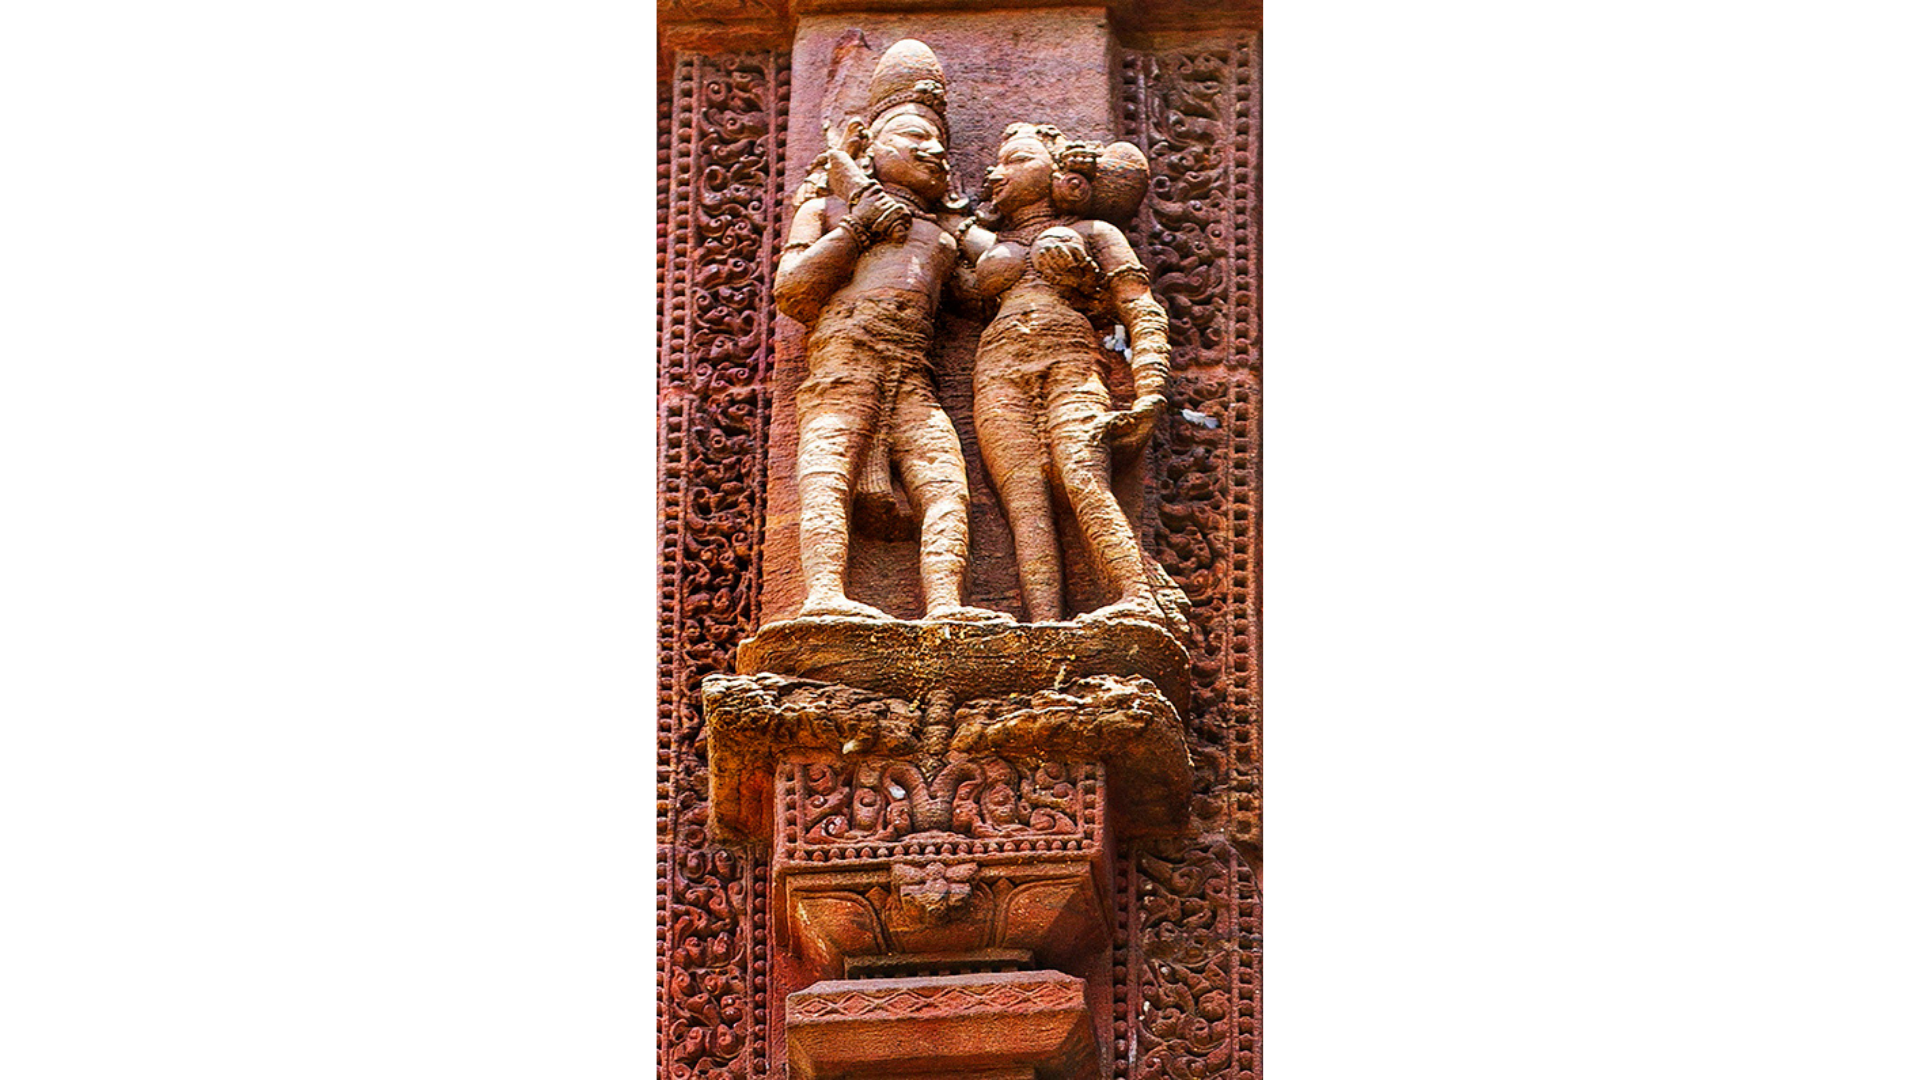 Sculptures of women and other figures in various poses on the walls of the temple. These are strikingly similar to those found in the Khajuraho temples in Madhya Pradesh